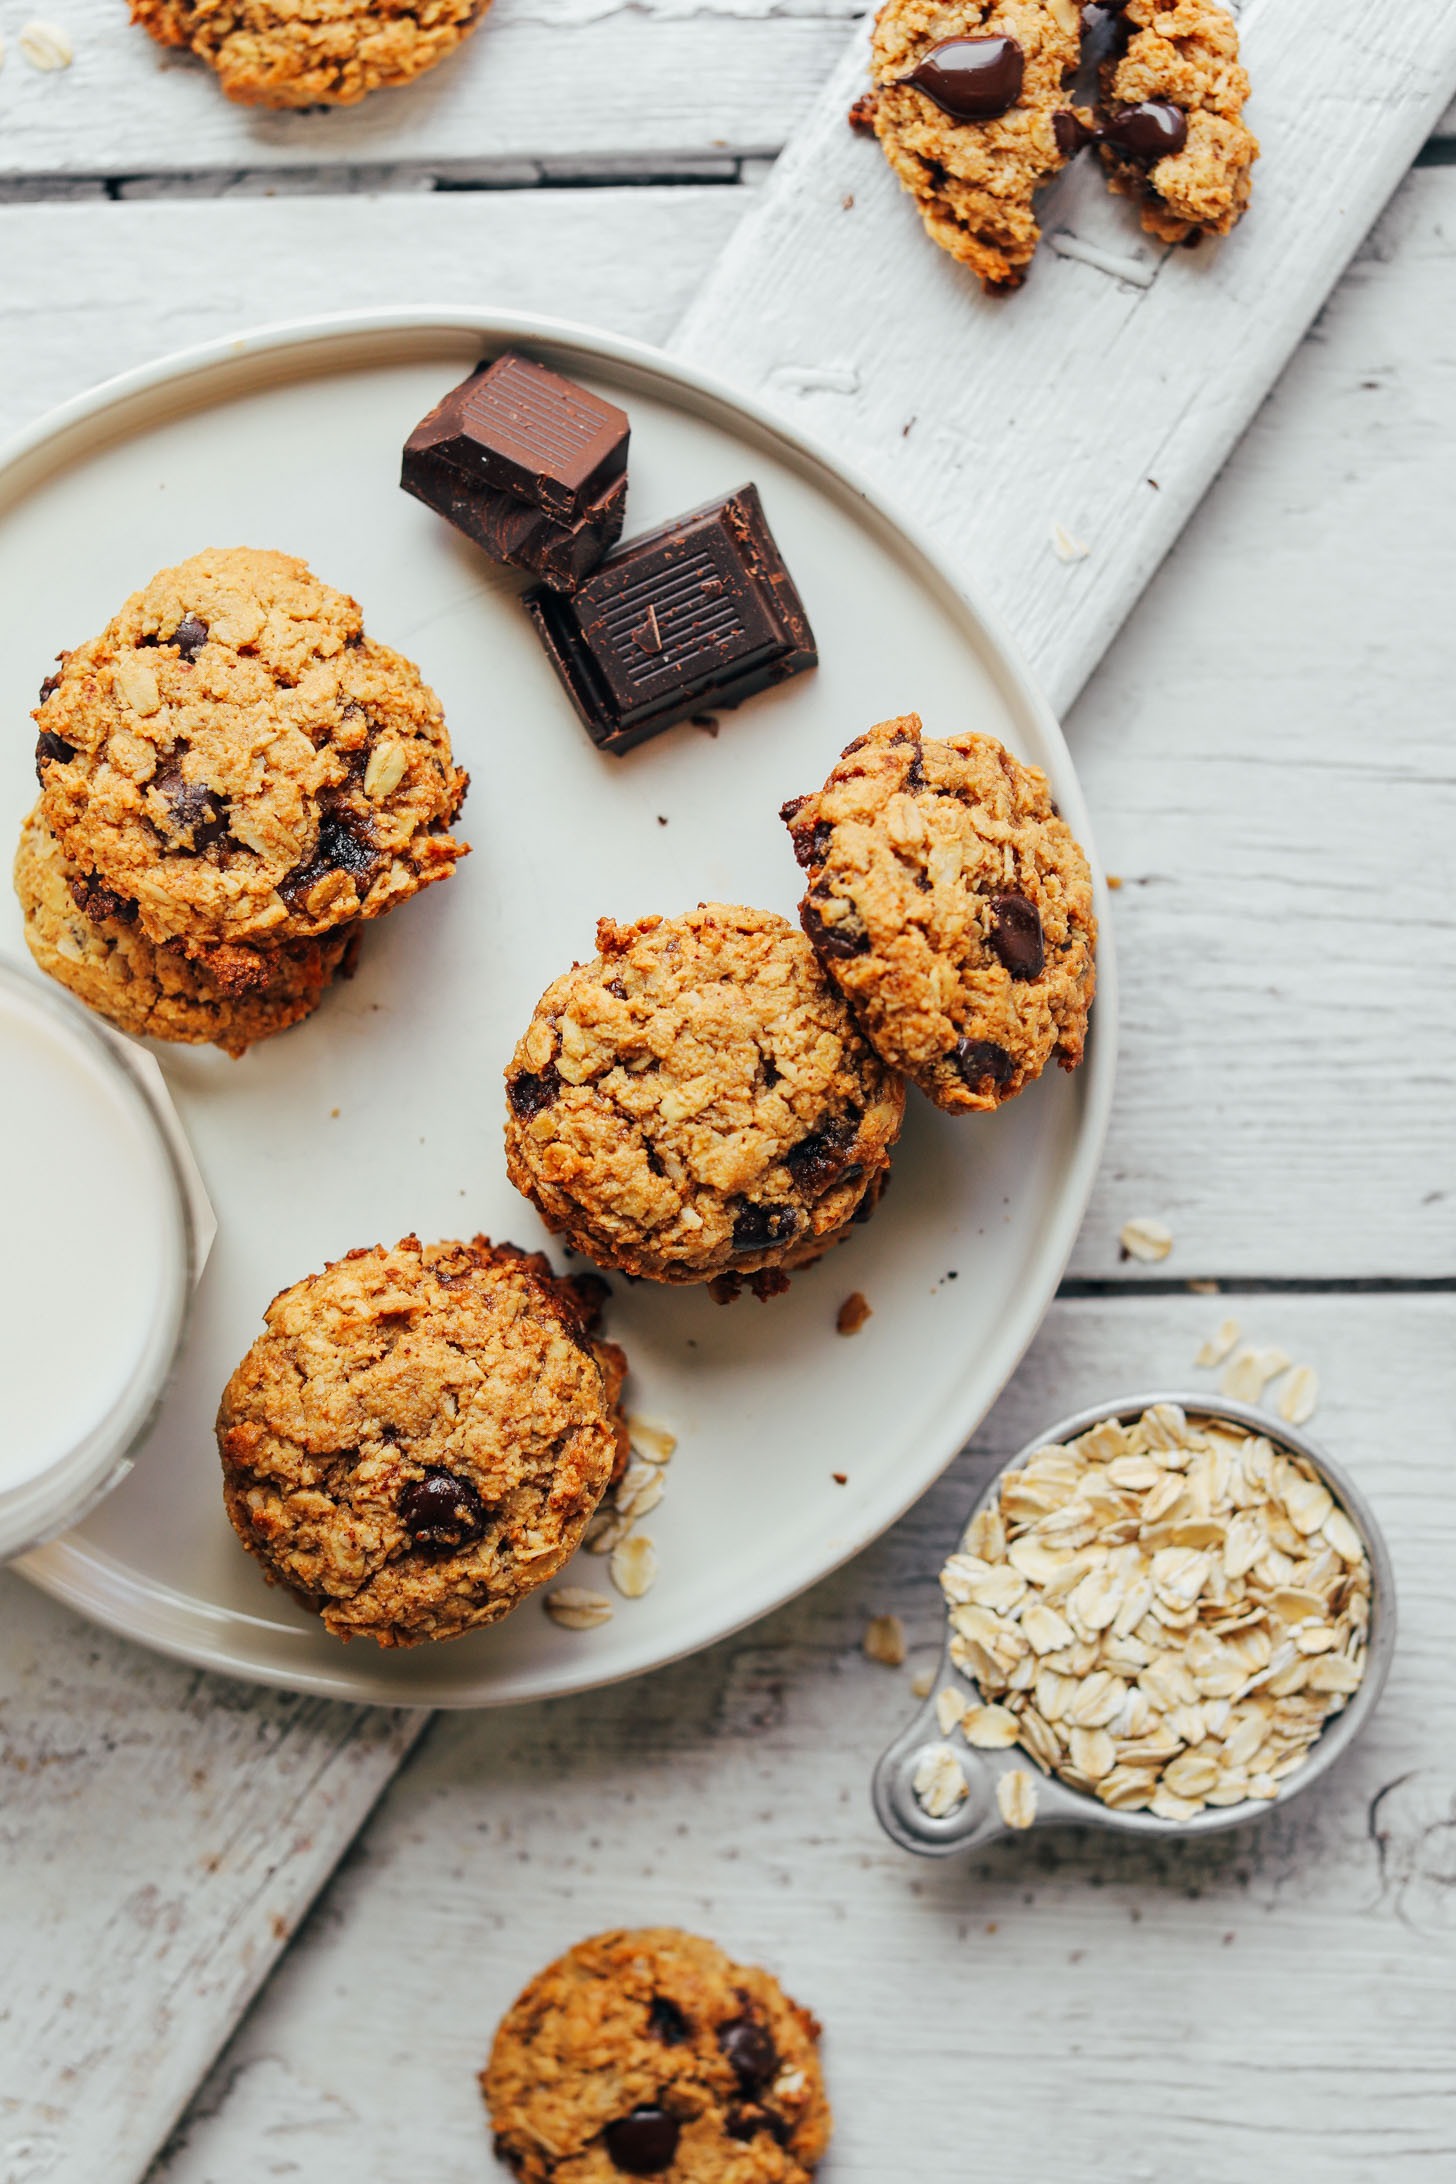 Chocolate Chip Oatmeal Cookies Healthy
 Gluten Free Oatmeal Chocolate Chip Cookies